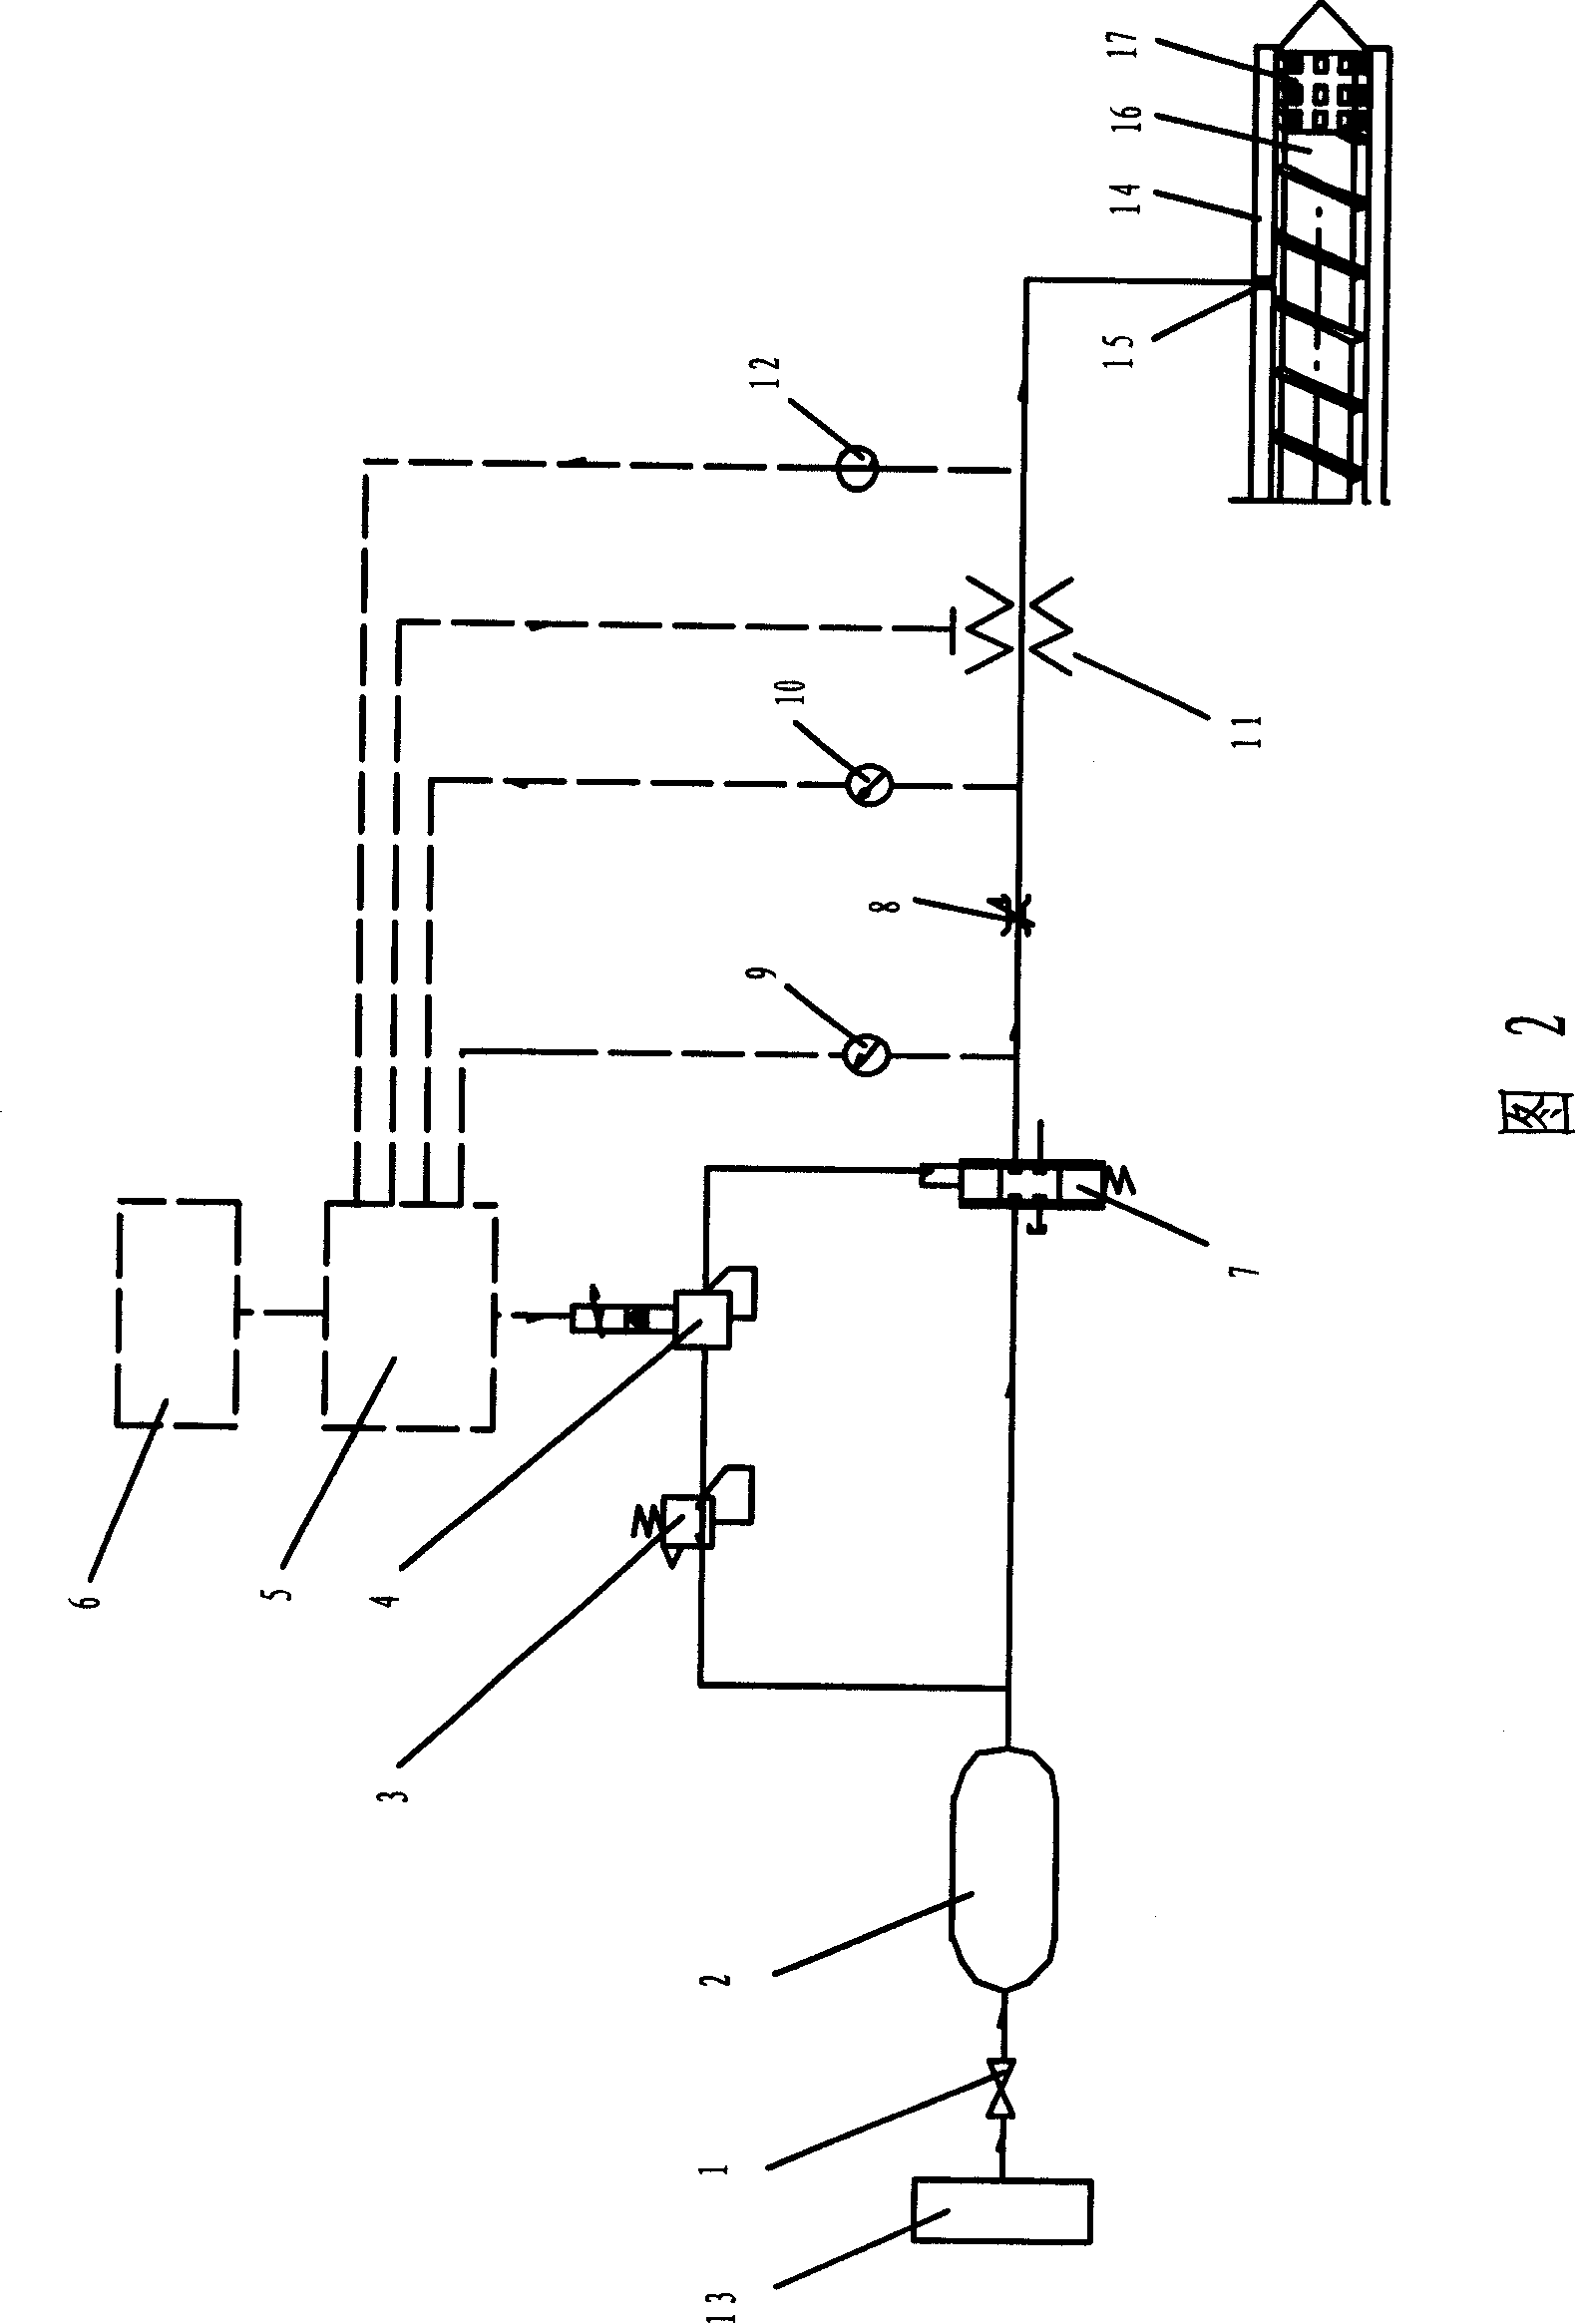 Fluid flow control system of gas foaming agent